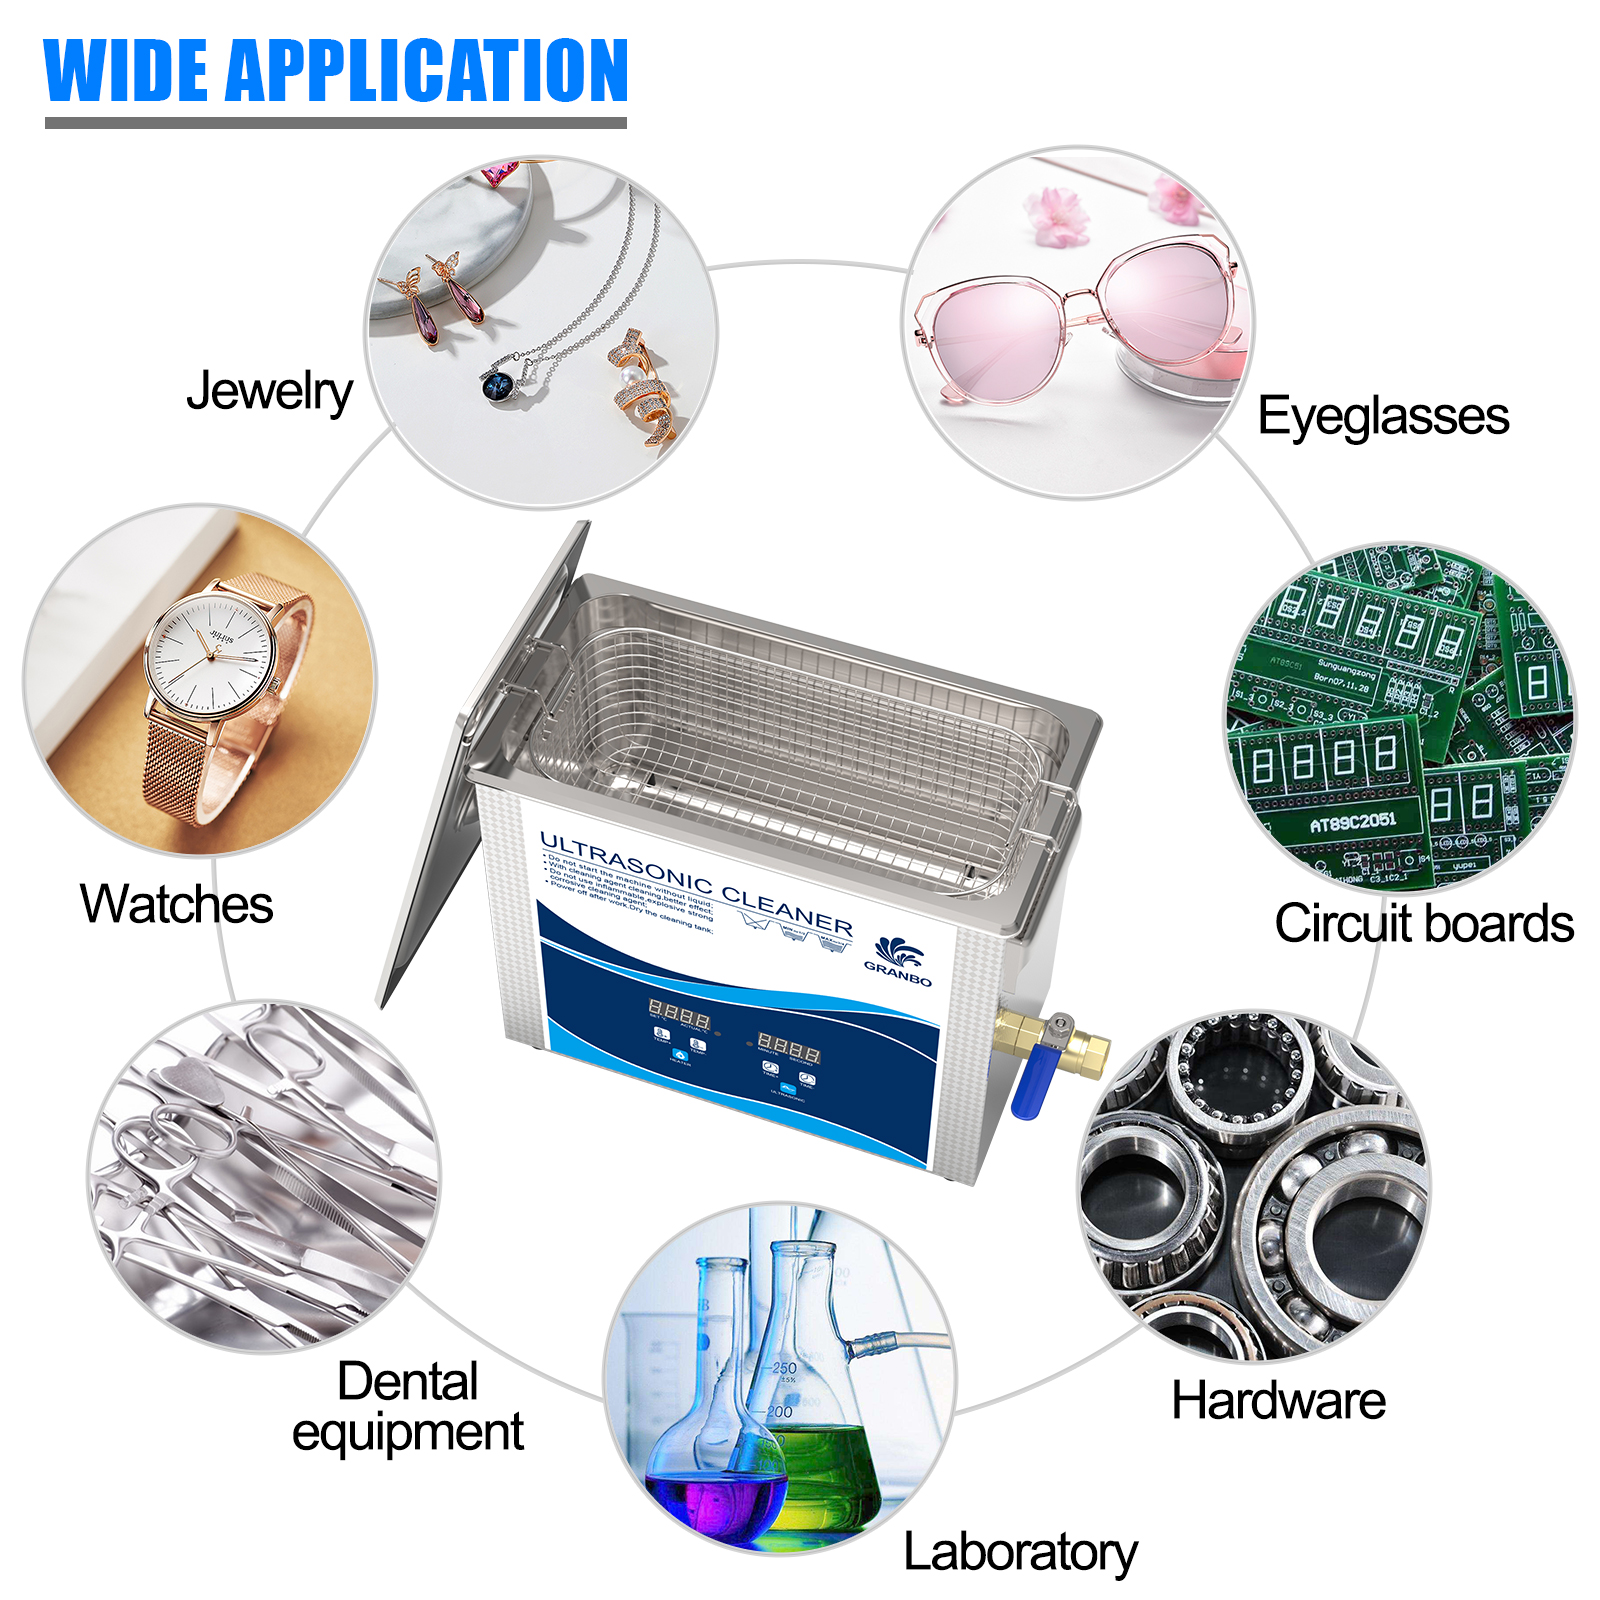 Ultrasonic cleaner: an excellent choice for cleaning precision objects